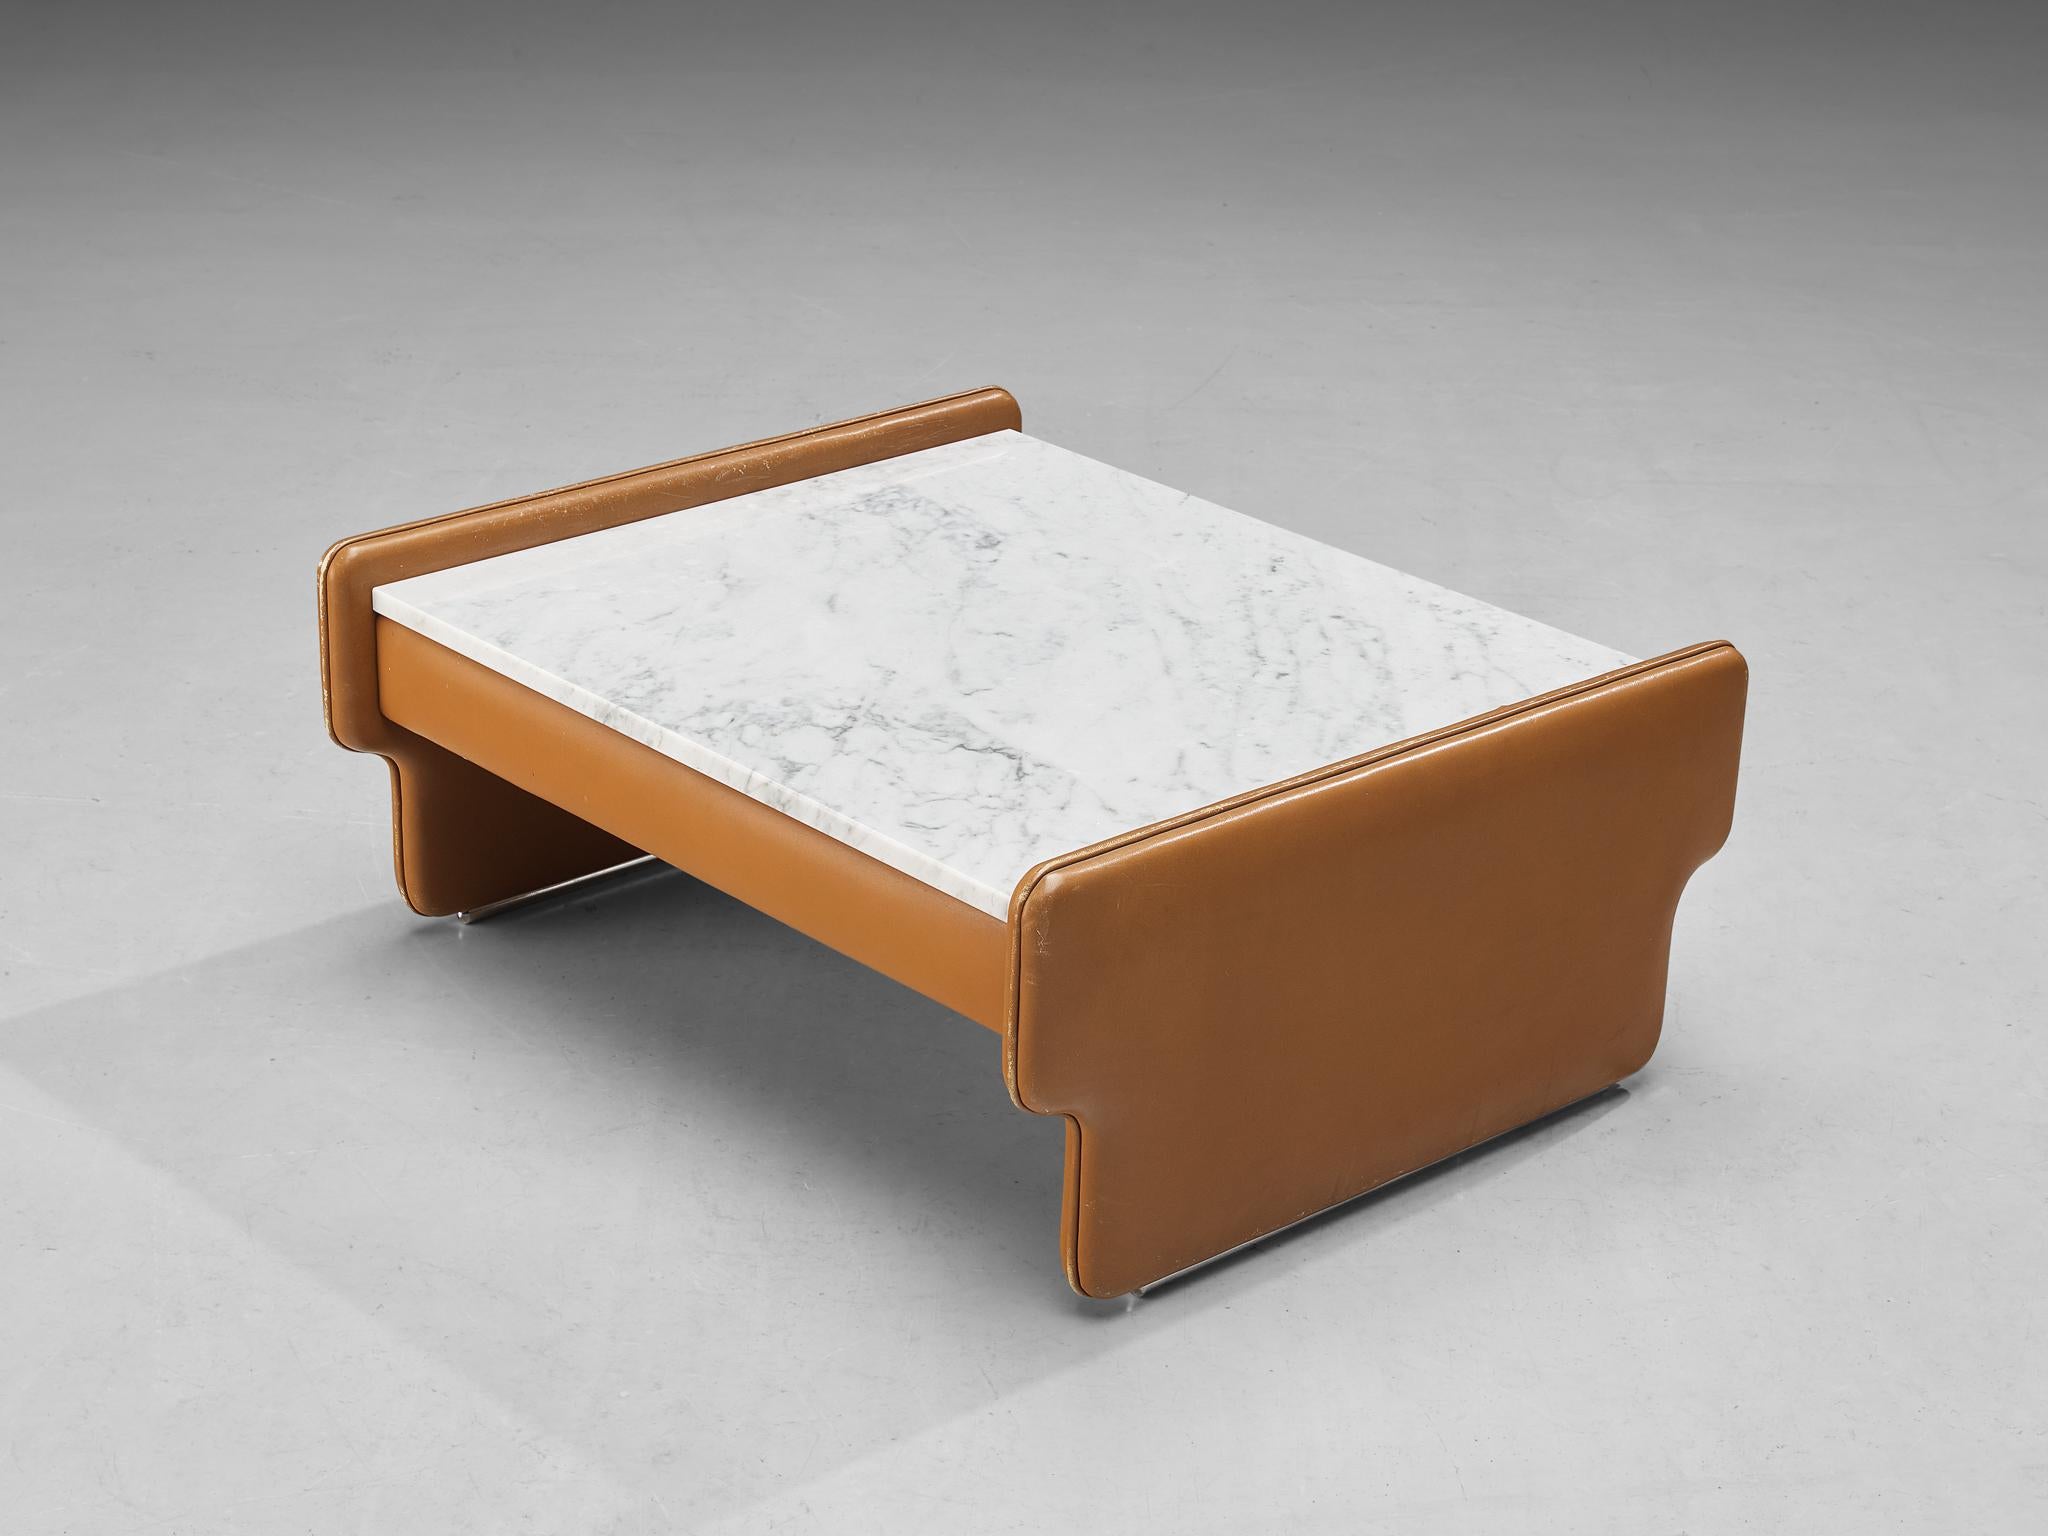 Coffee table, leather, Carrara marble, Italy, 1970s. 

This coffee table truly radiates Italian design of the seventies. The use of soft cognac leather combined with striking geometric forms is highly notable and characteristic for that era. The